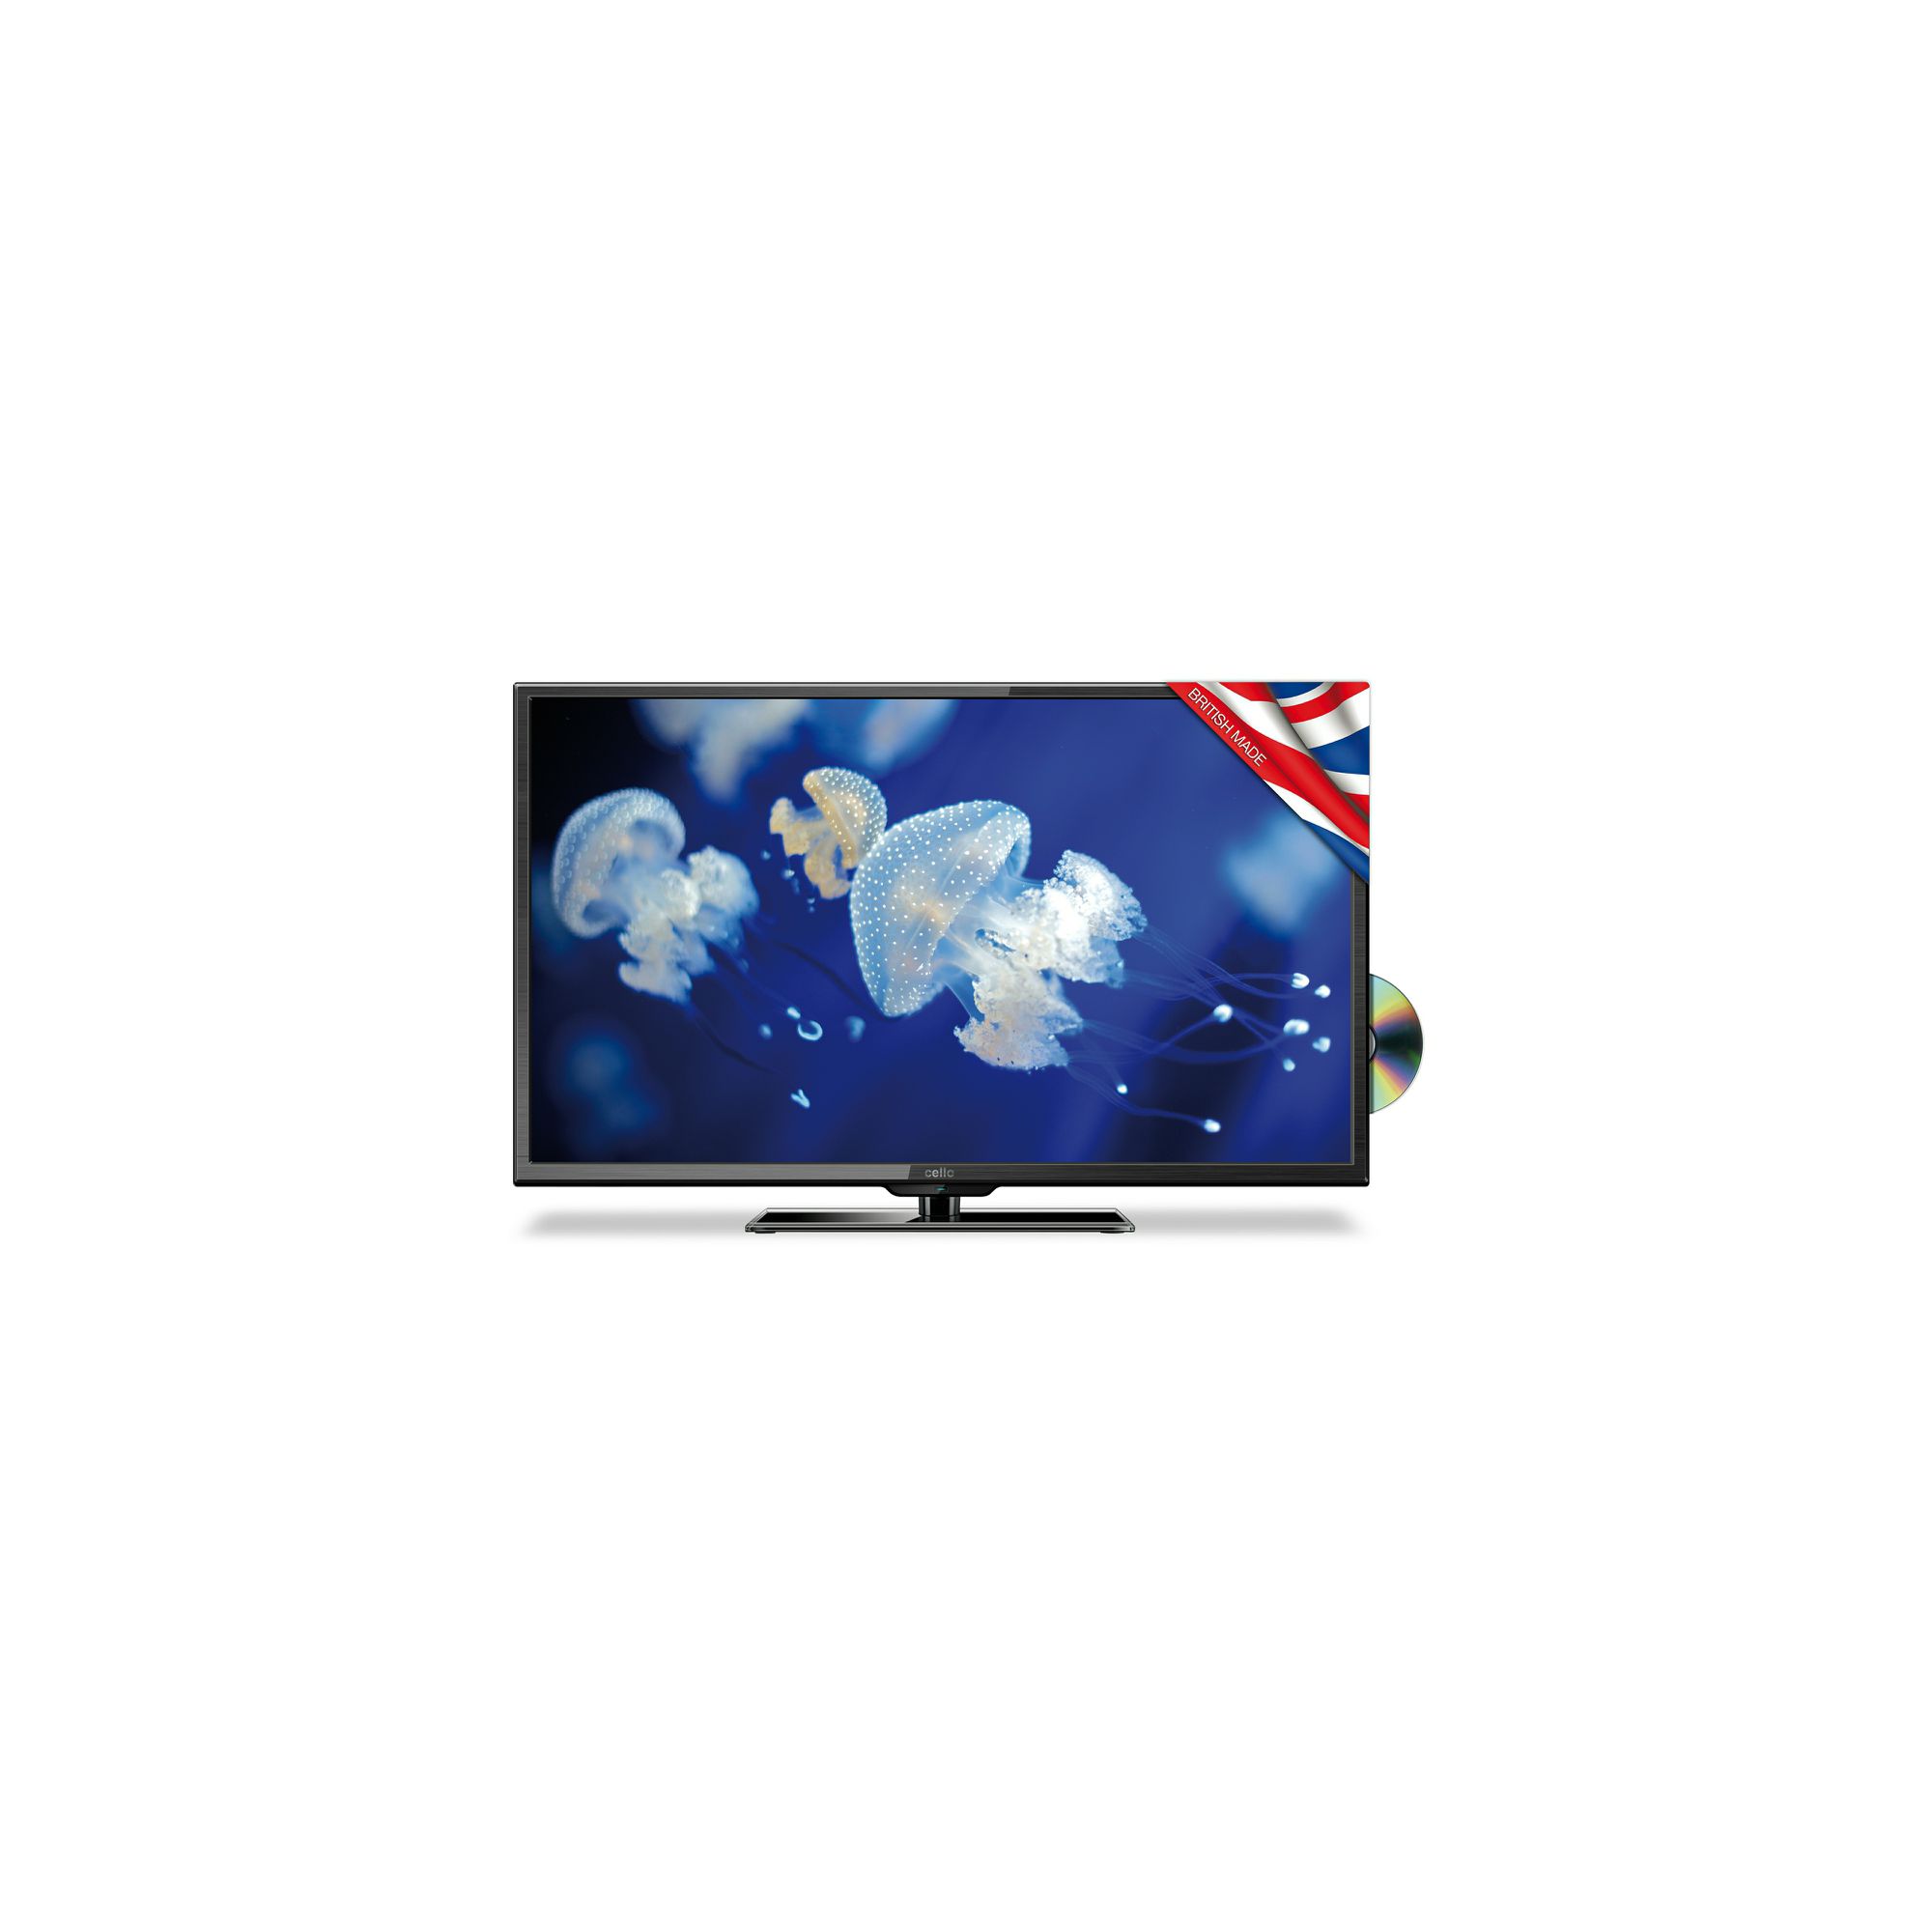 Cello 40” Full HD LED TV with Built-in DVD Player